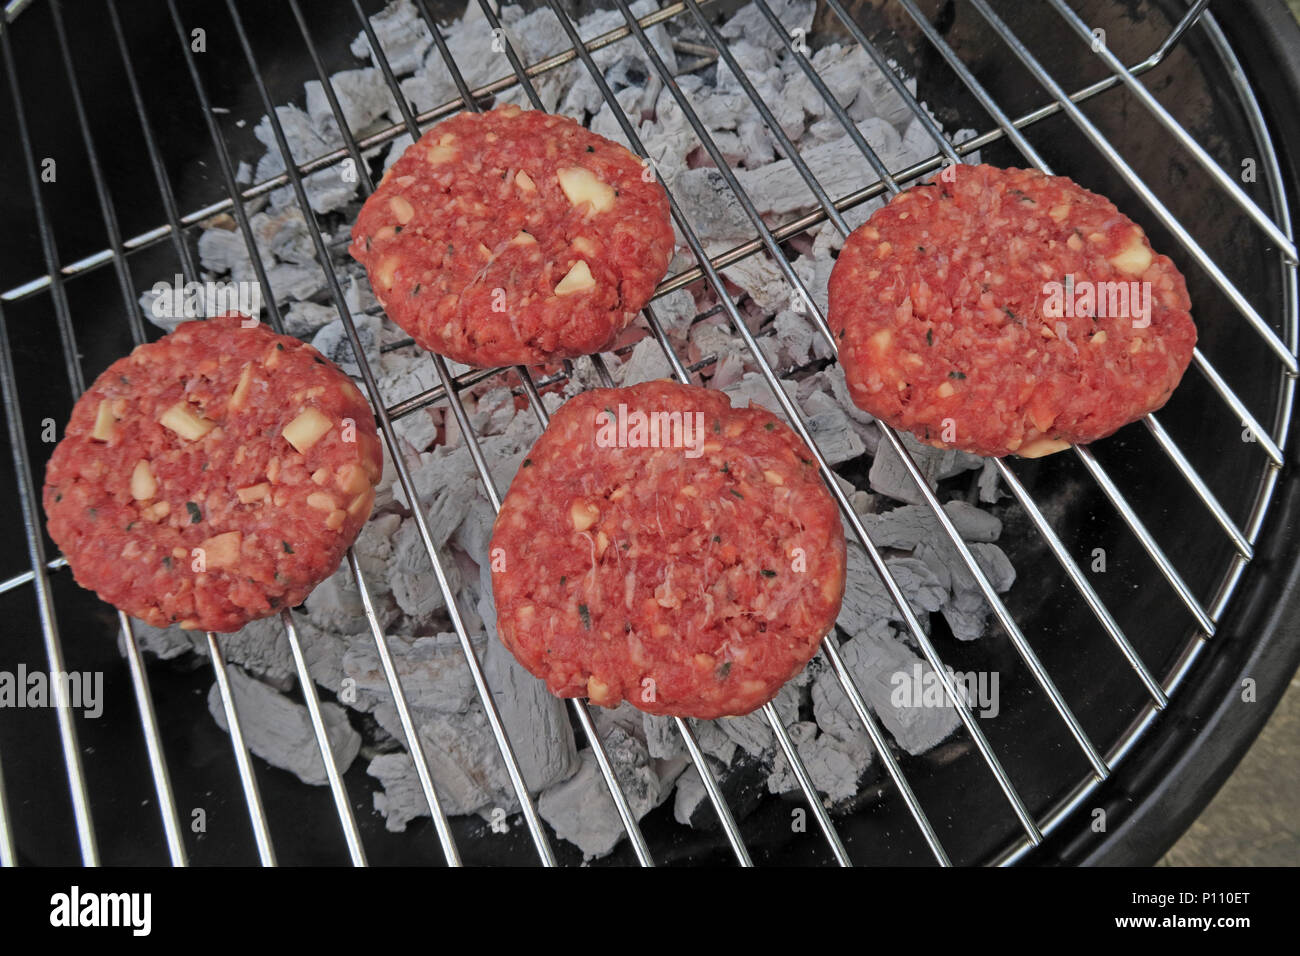 Dangers of food poisoning from summer BBQ meat, Sausages, beef burgers, Kebabs, under-cooked or raw Stock Photo